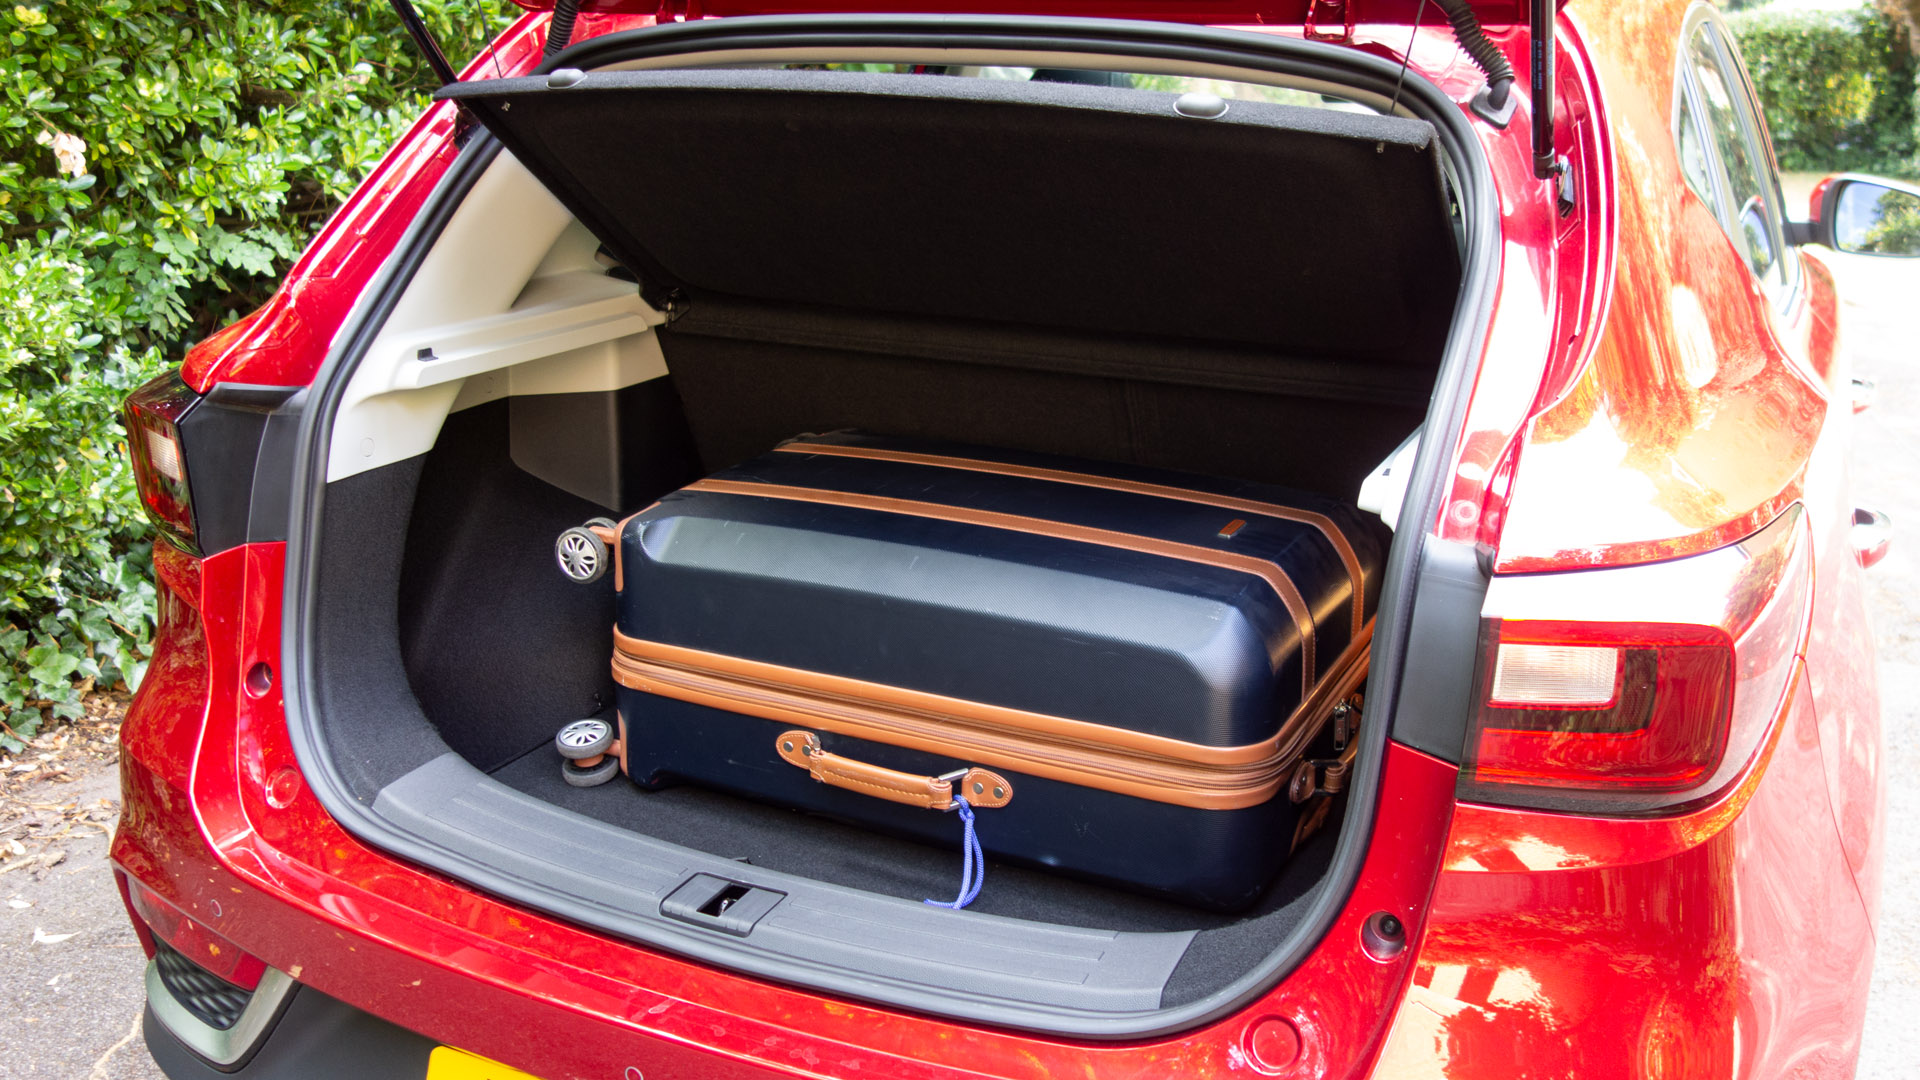 MG ZS EV boot space